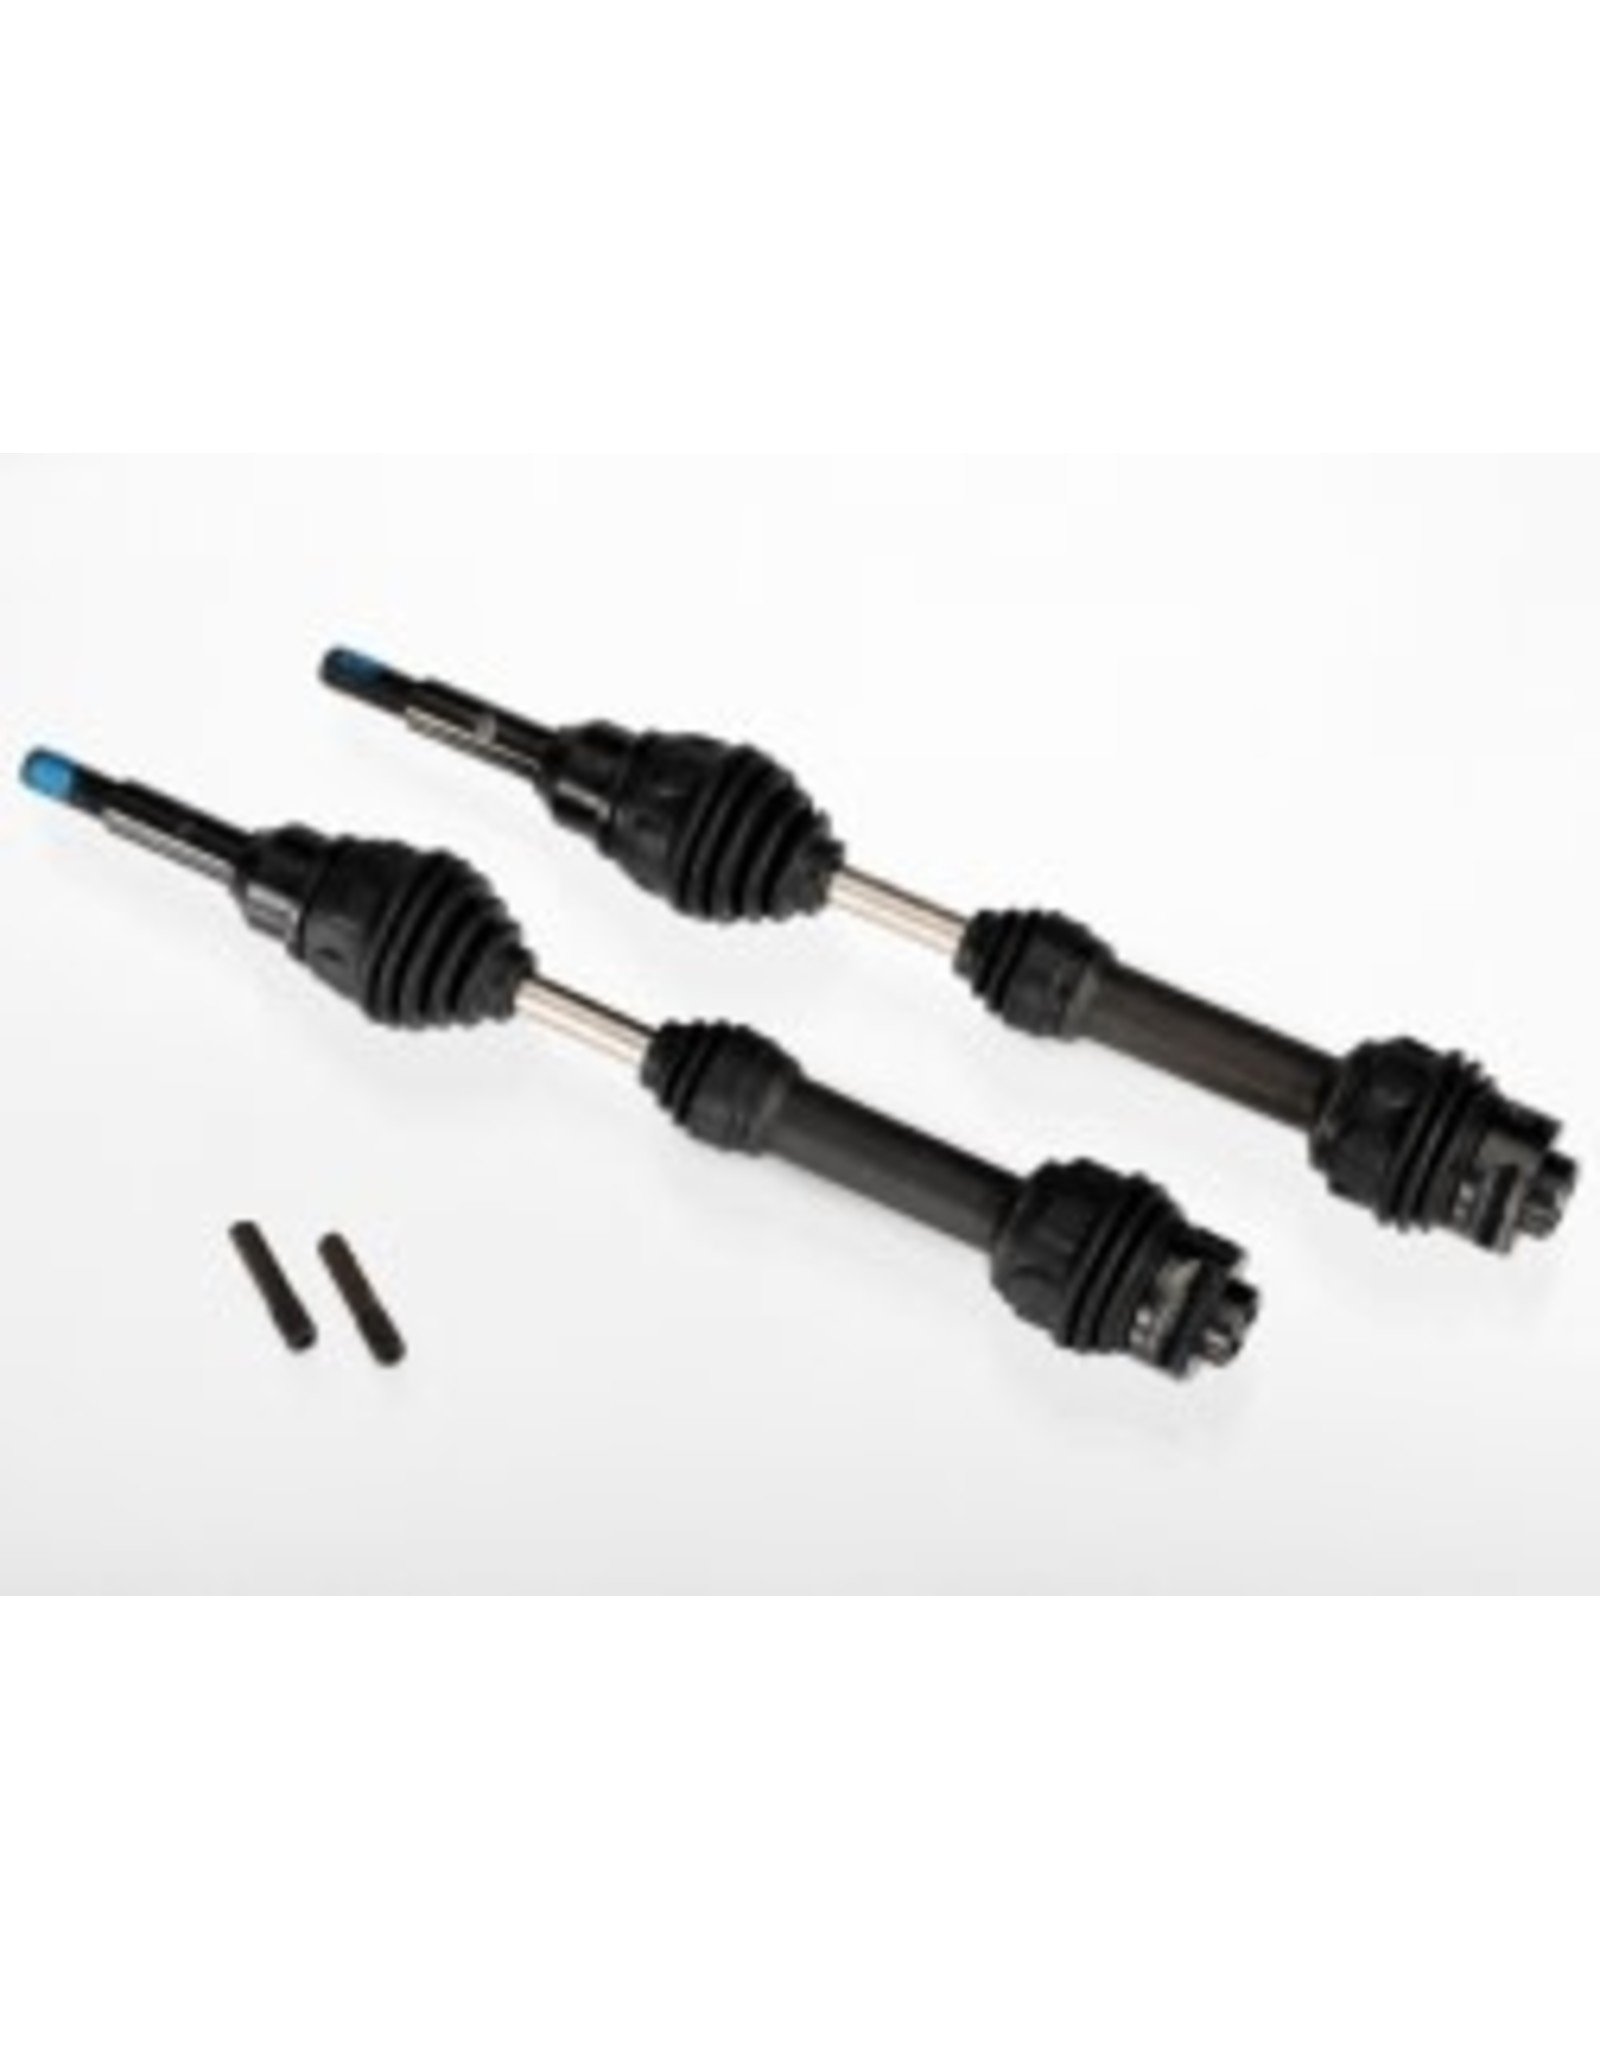 Traxxas [Driveshafts, front, steel-spline constant-velocity (complete assembly) (2)] Driveshafts, front, steel-spline constant-velocity (complete assembly) (2)